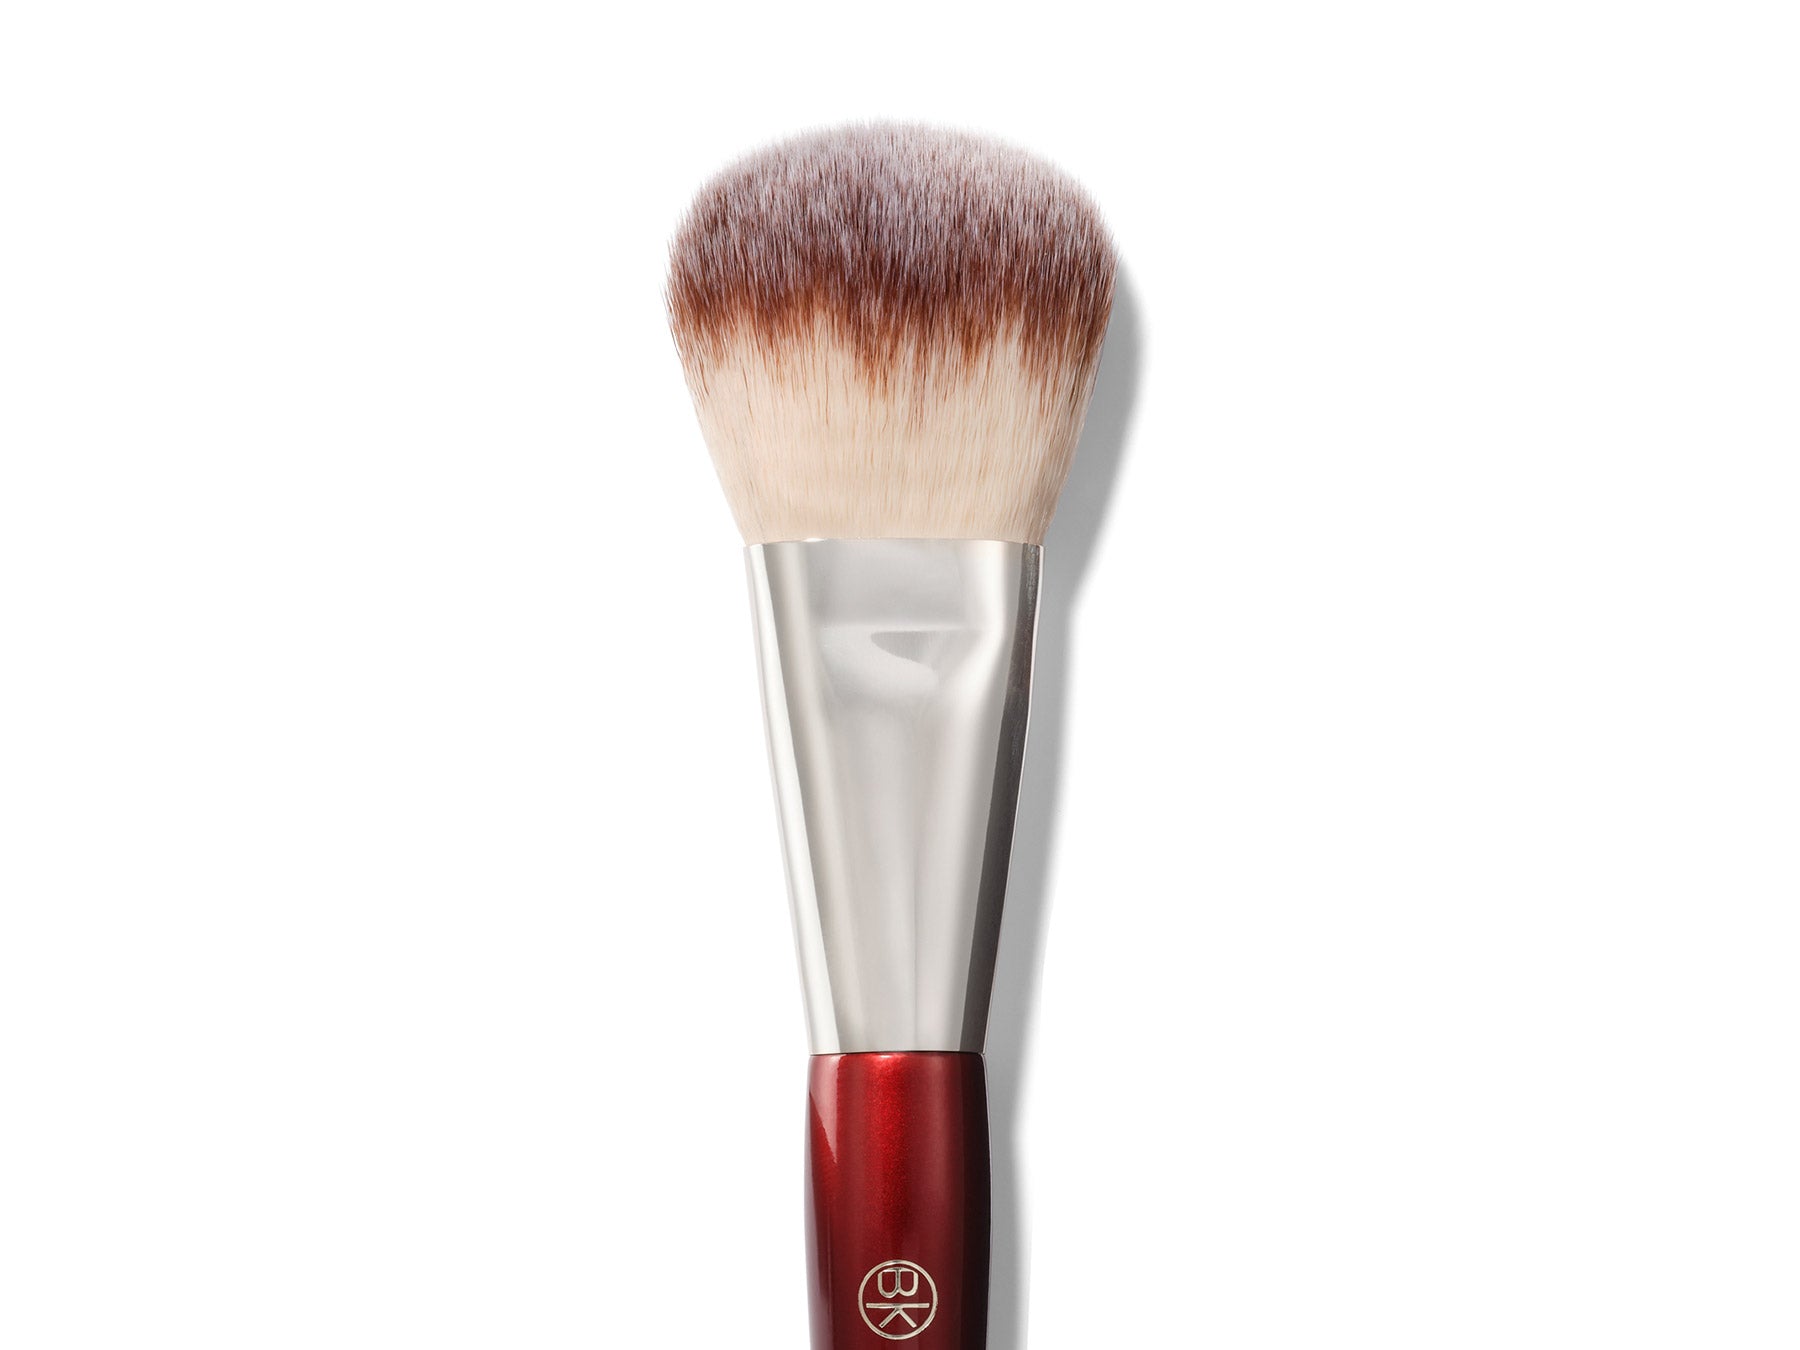 The Essentials Brush Collection by BK Beauty